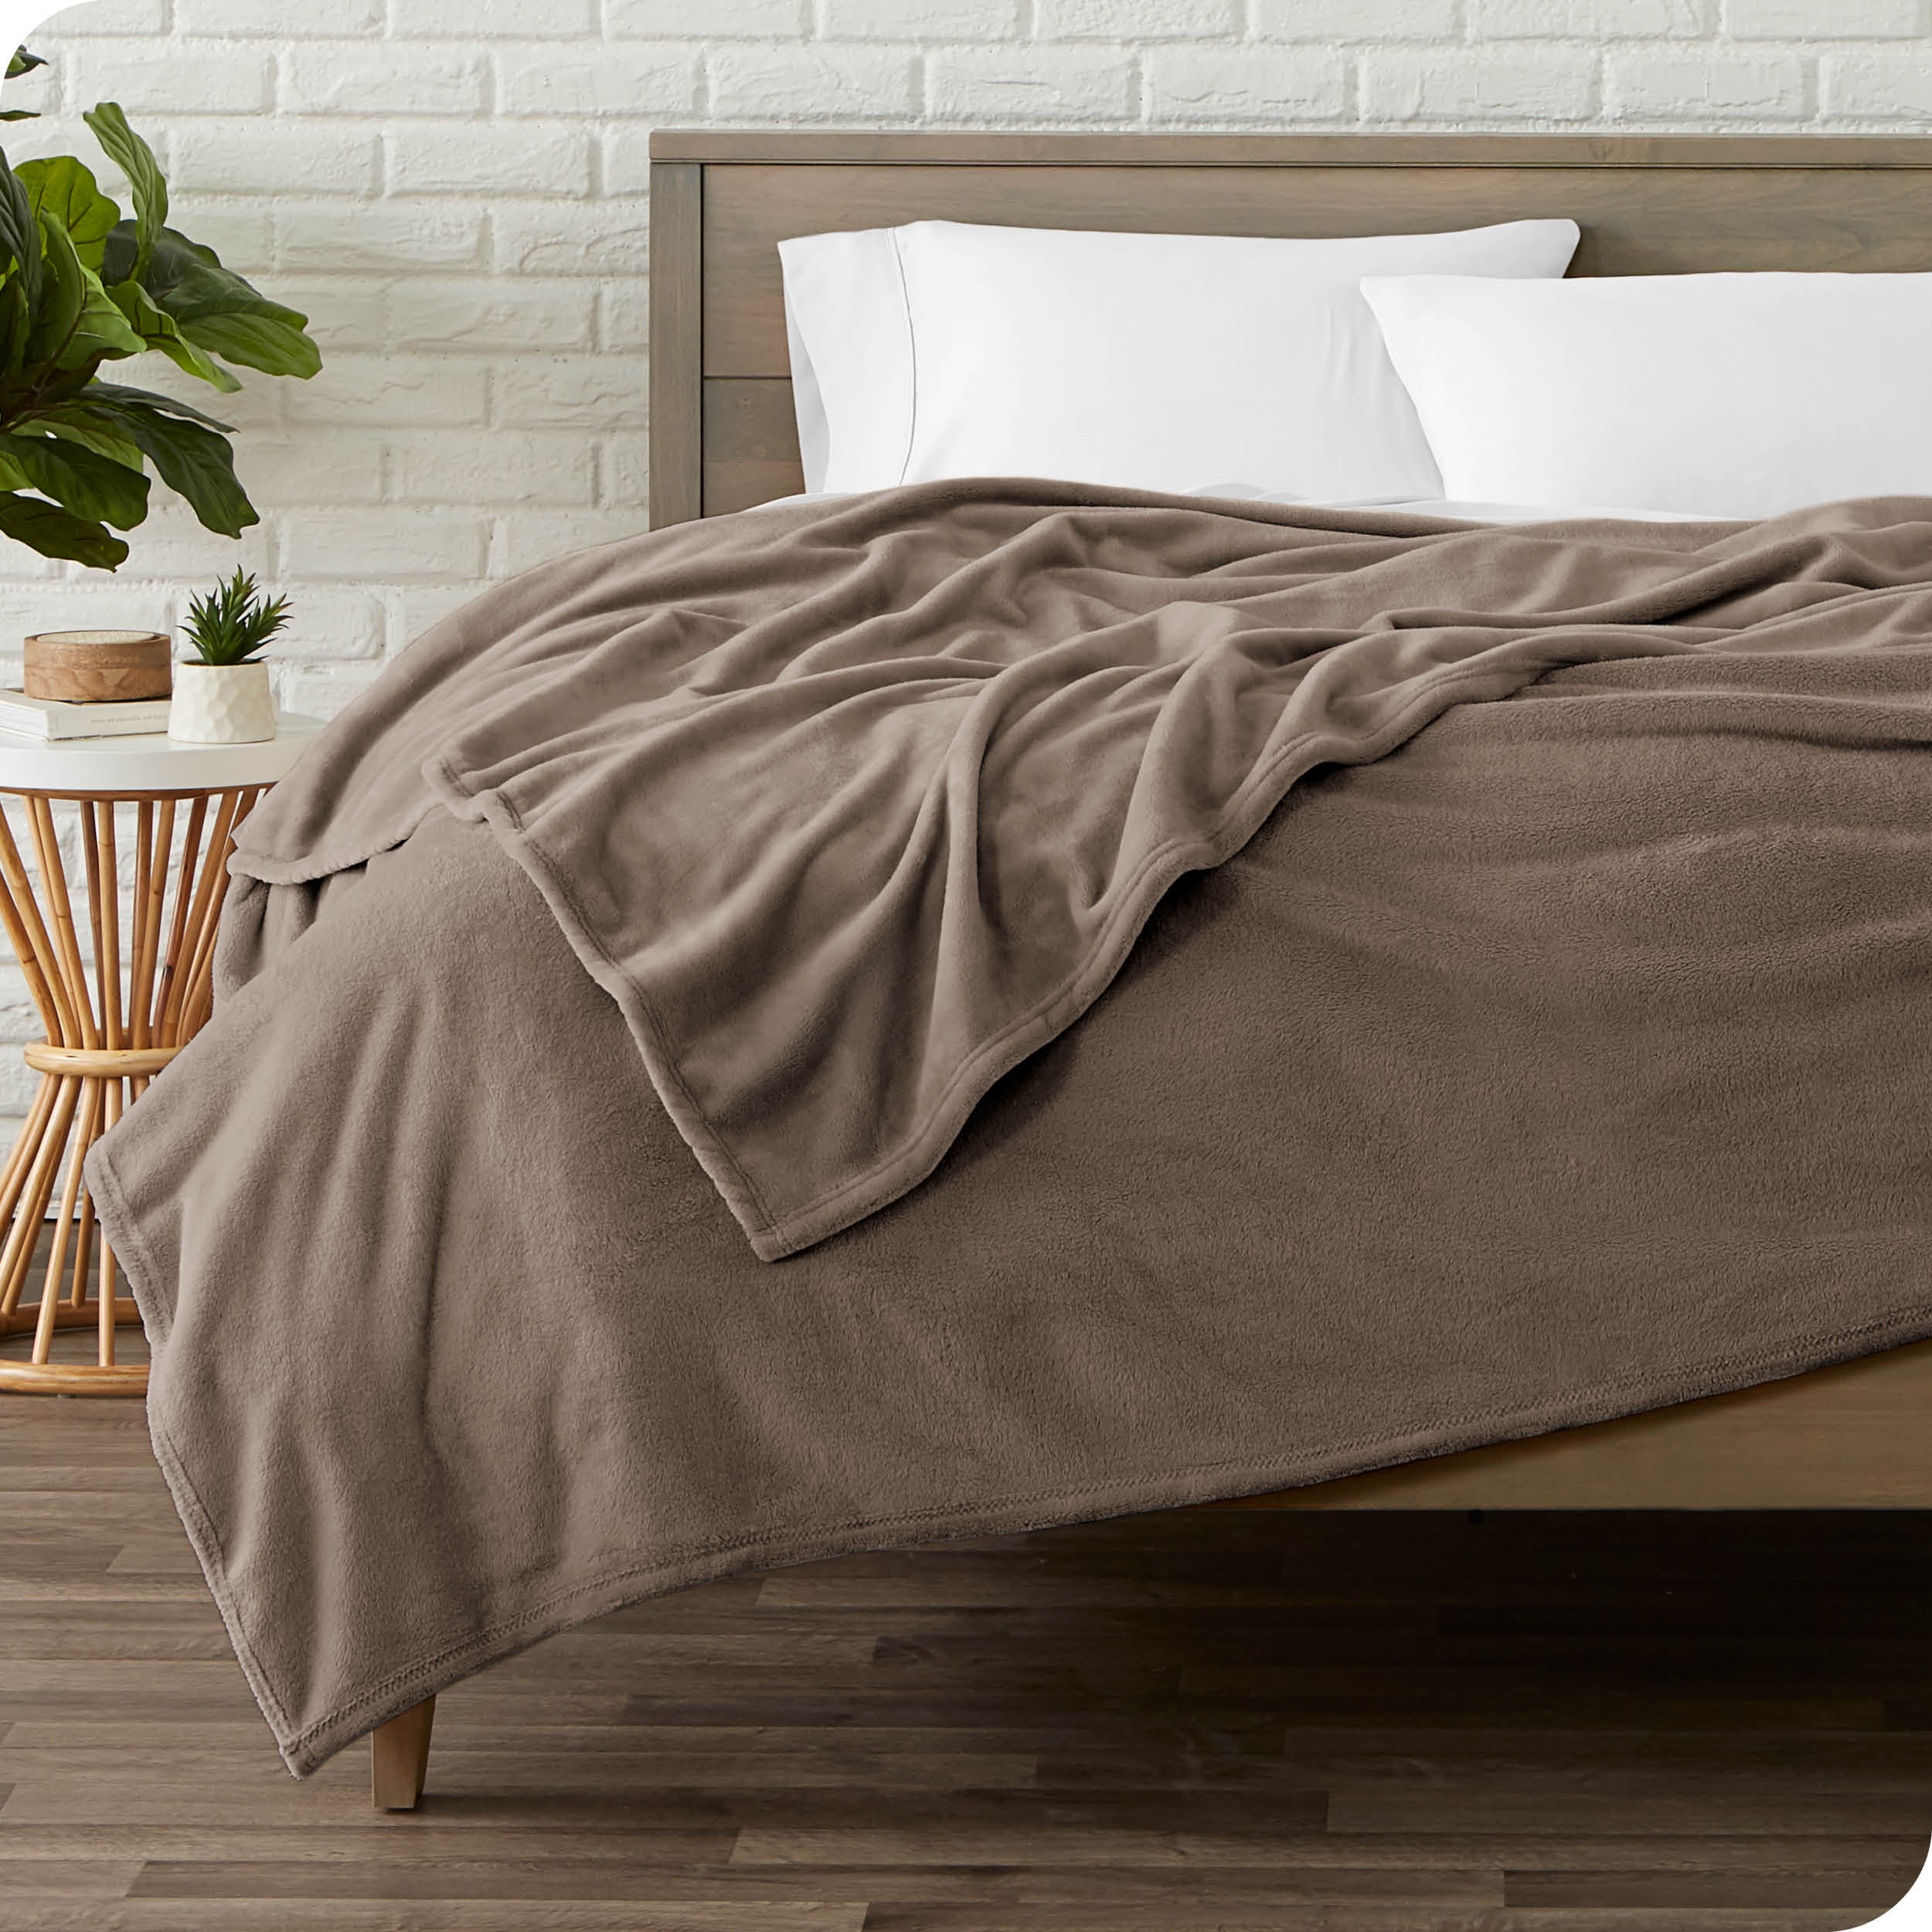 Details about   Mainstays King Super Soft Plush Bed Blanket in Brownstone 